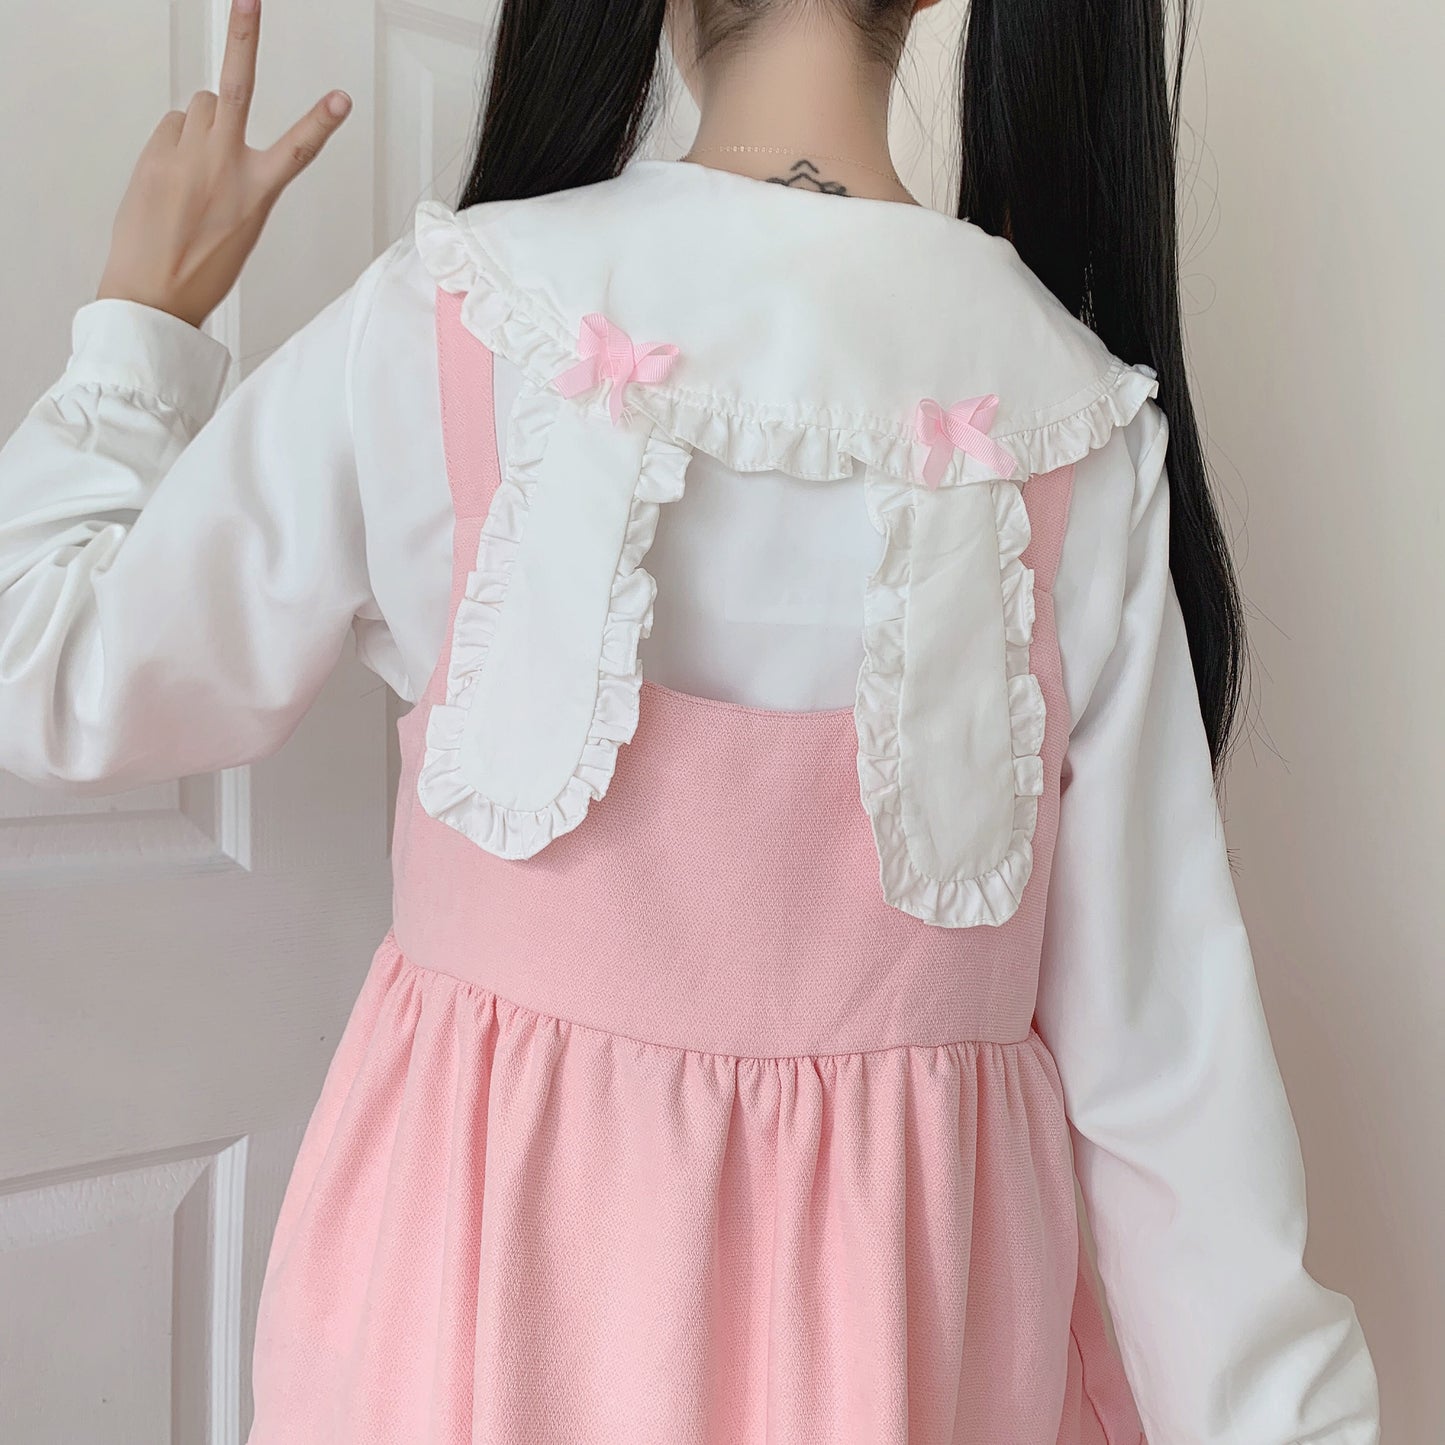 Kawaii Bunny Suspender Dress and Shirt From the Back View